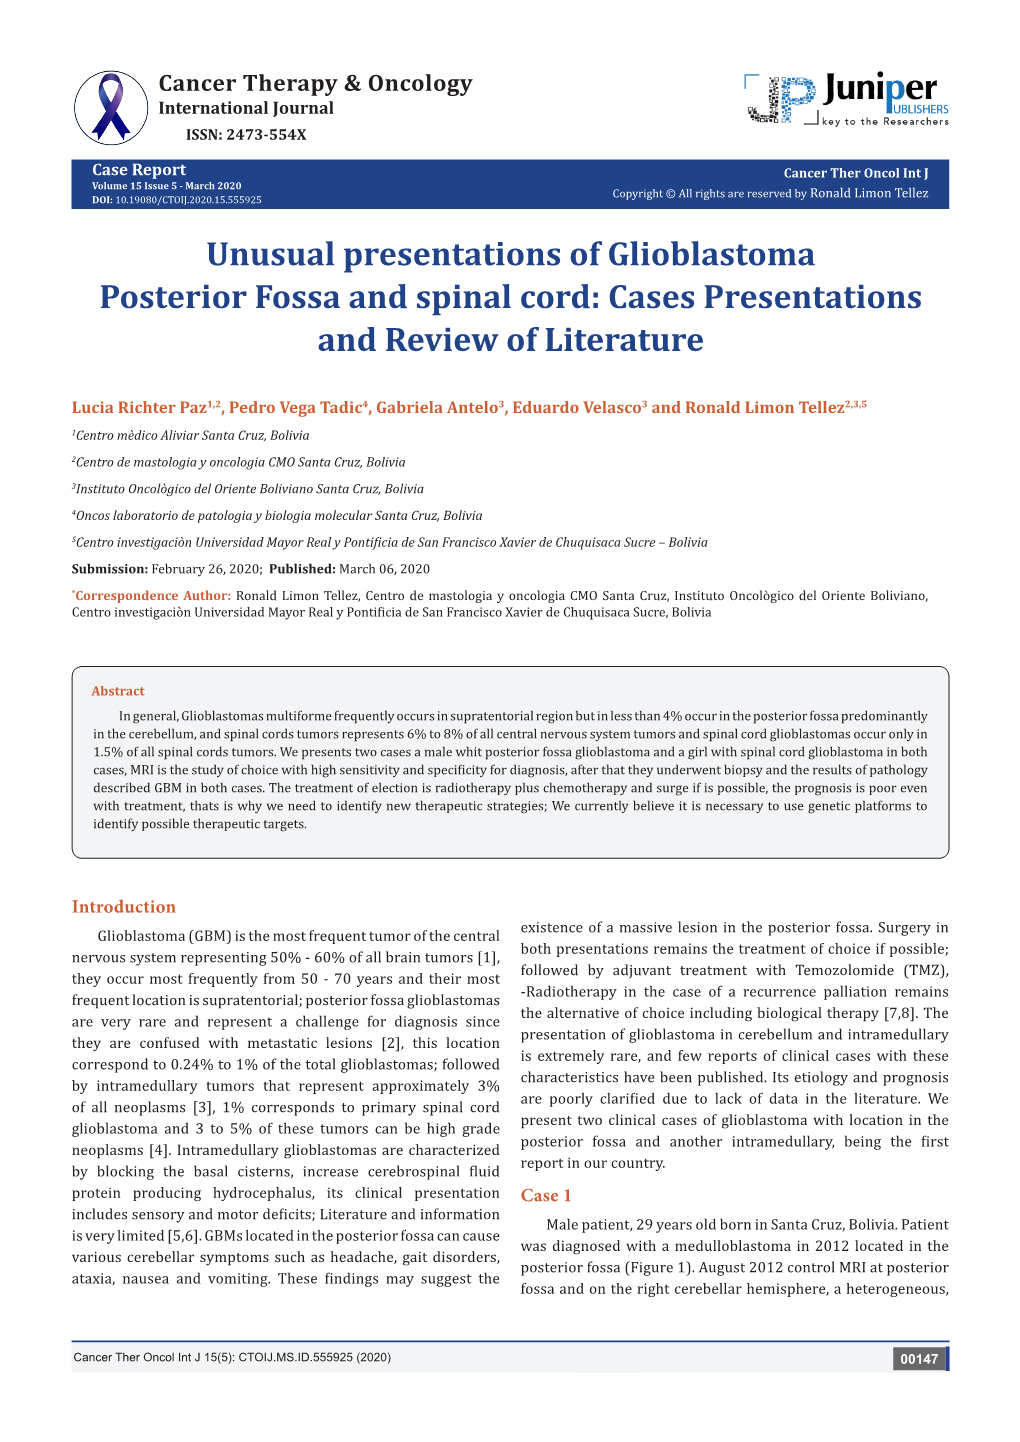 Unusual Presentations of Glioblastoma Posterior Fossa and Spinal Cord: Cases Presentations and Review of Literature